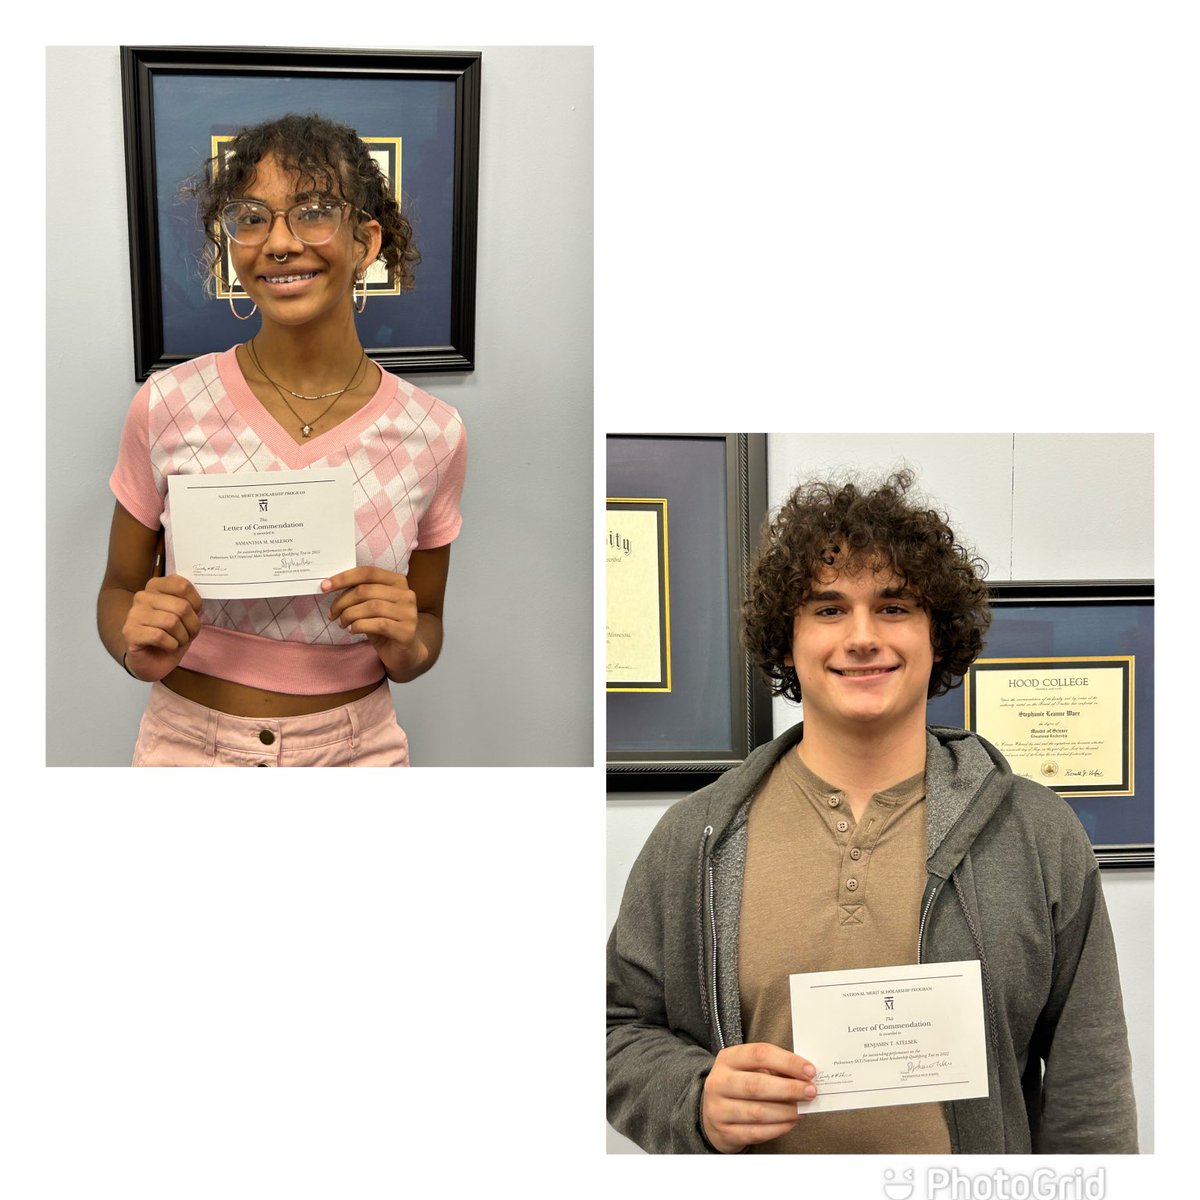 Congratulations to Samantha Maleson & Ben Atelsek on receiving A Letter of Commendation from the National Merit  Scholarship Corporation based on PSATs last year! We are so proud of their accomplishments! 💙🦁💛 Go Lions!  ⁦@FCPSMaryland⁩